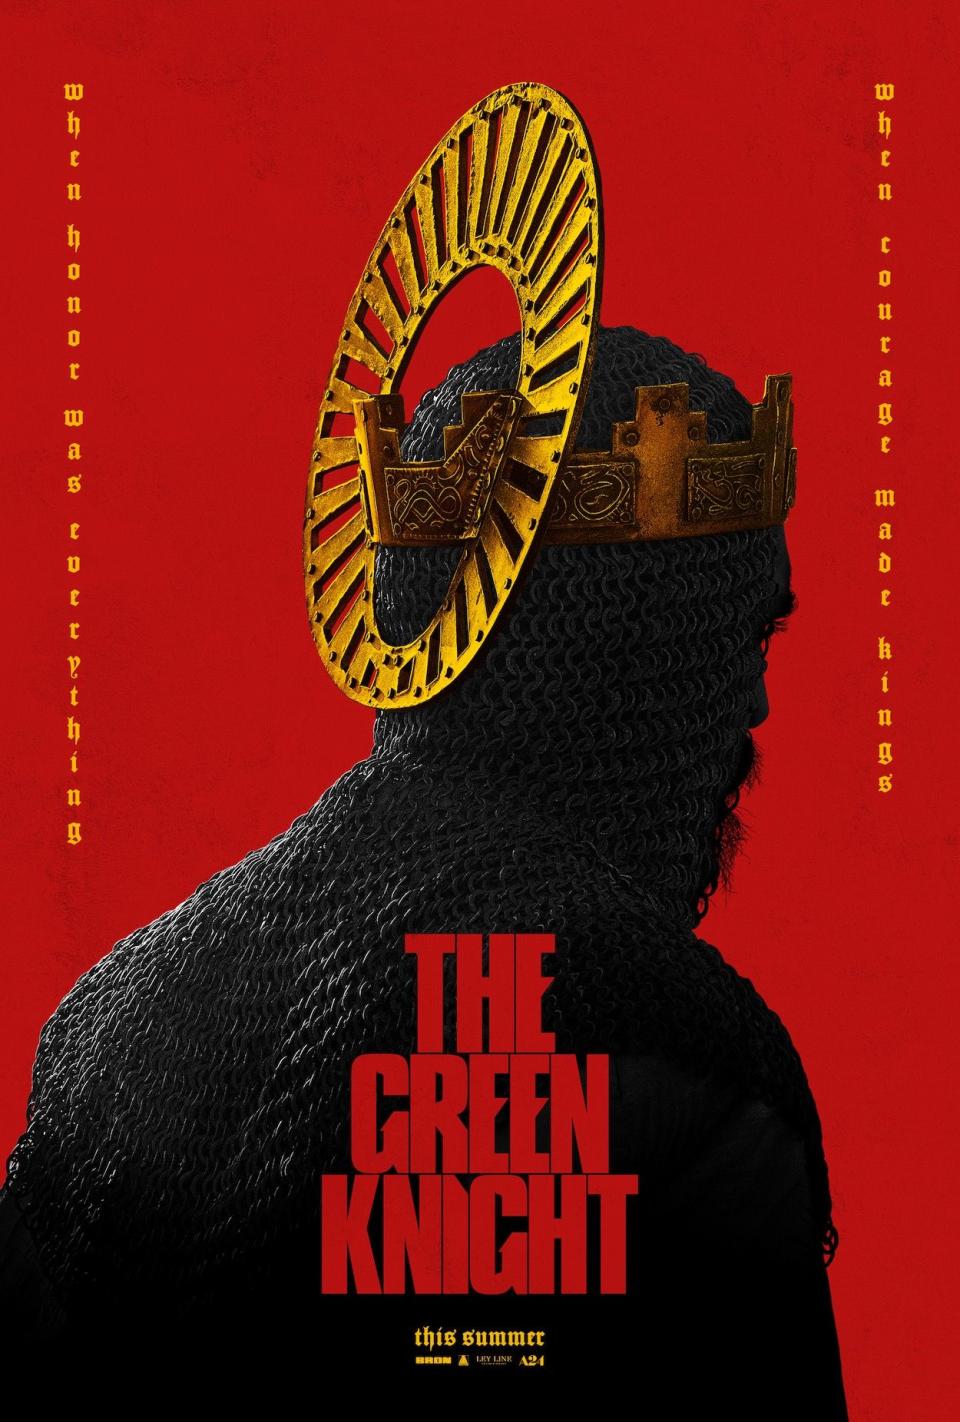 the green knight poster The Green Knight Trailer Casts Dev Patel as a Knight of the Round Table: Watch